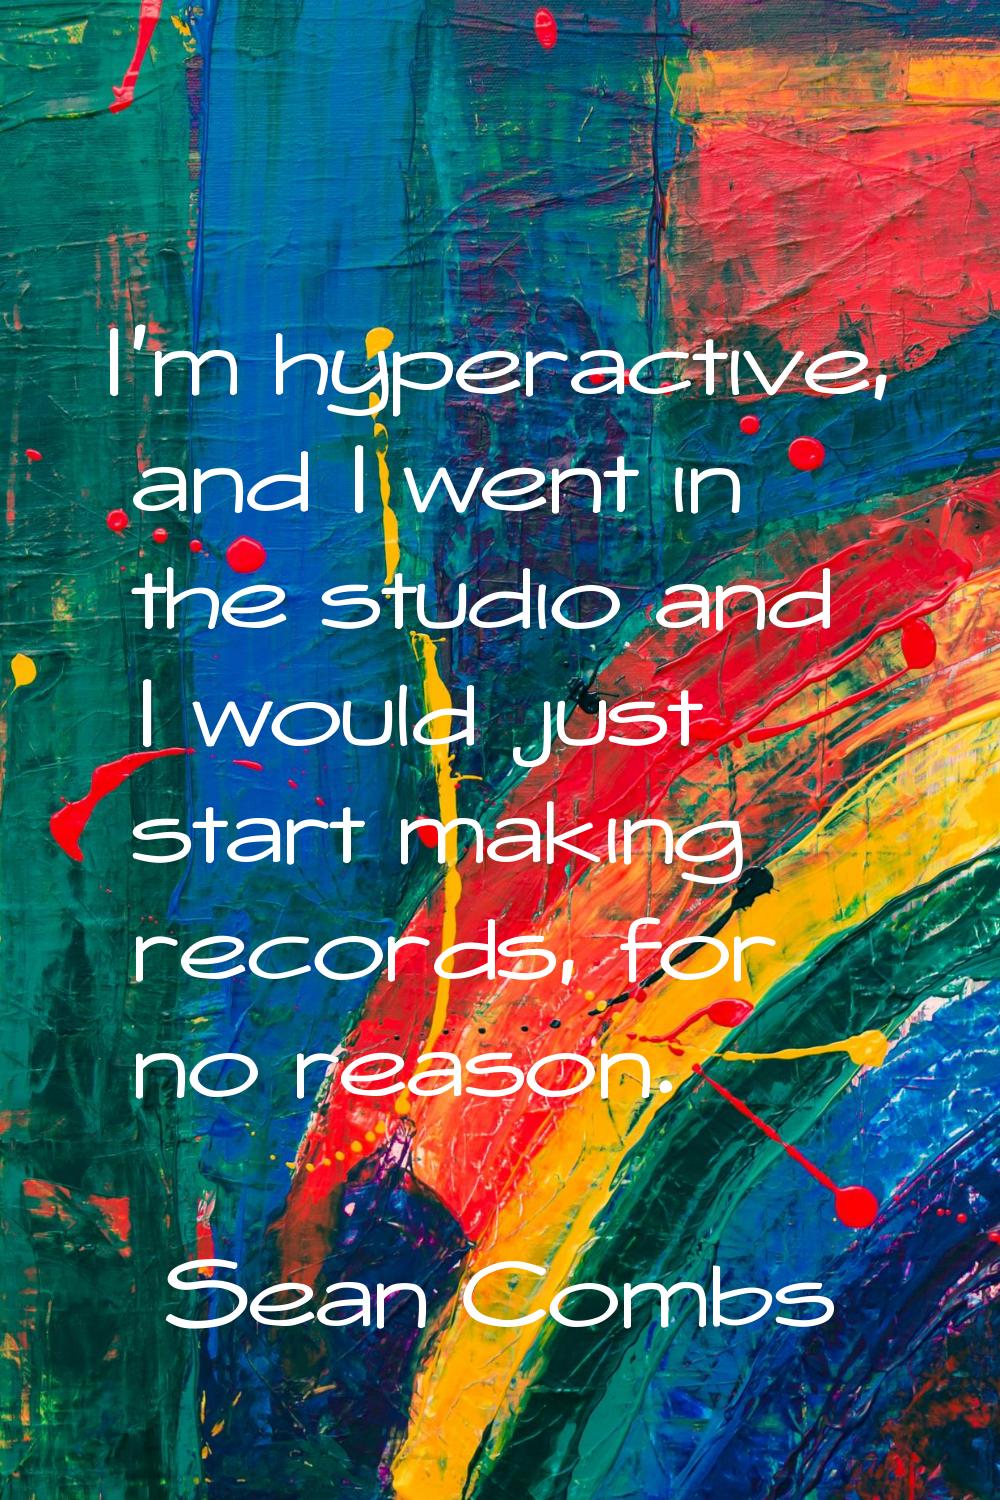 I'm hyperactive, and I went in the studio and I would just start making records, for no reason.